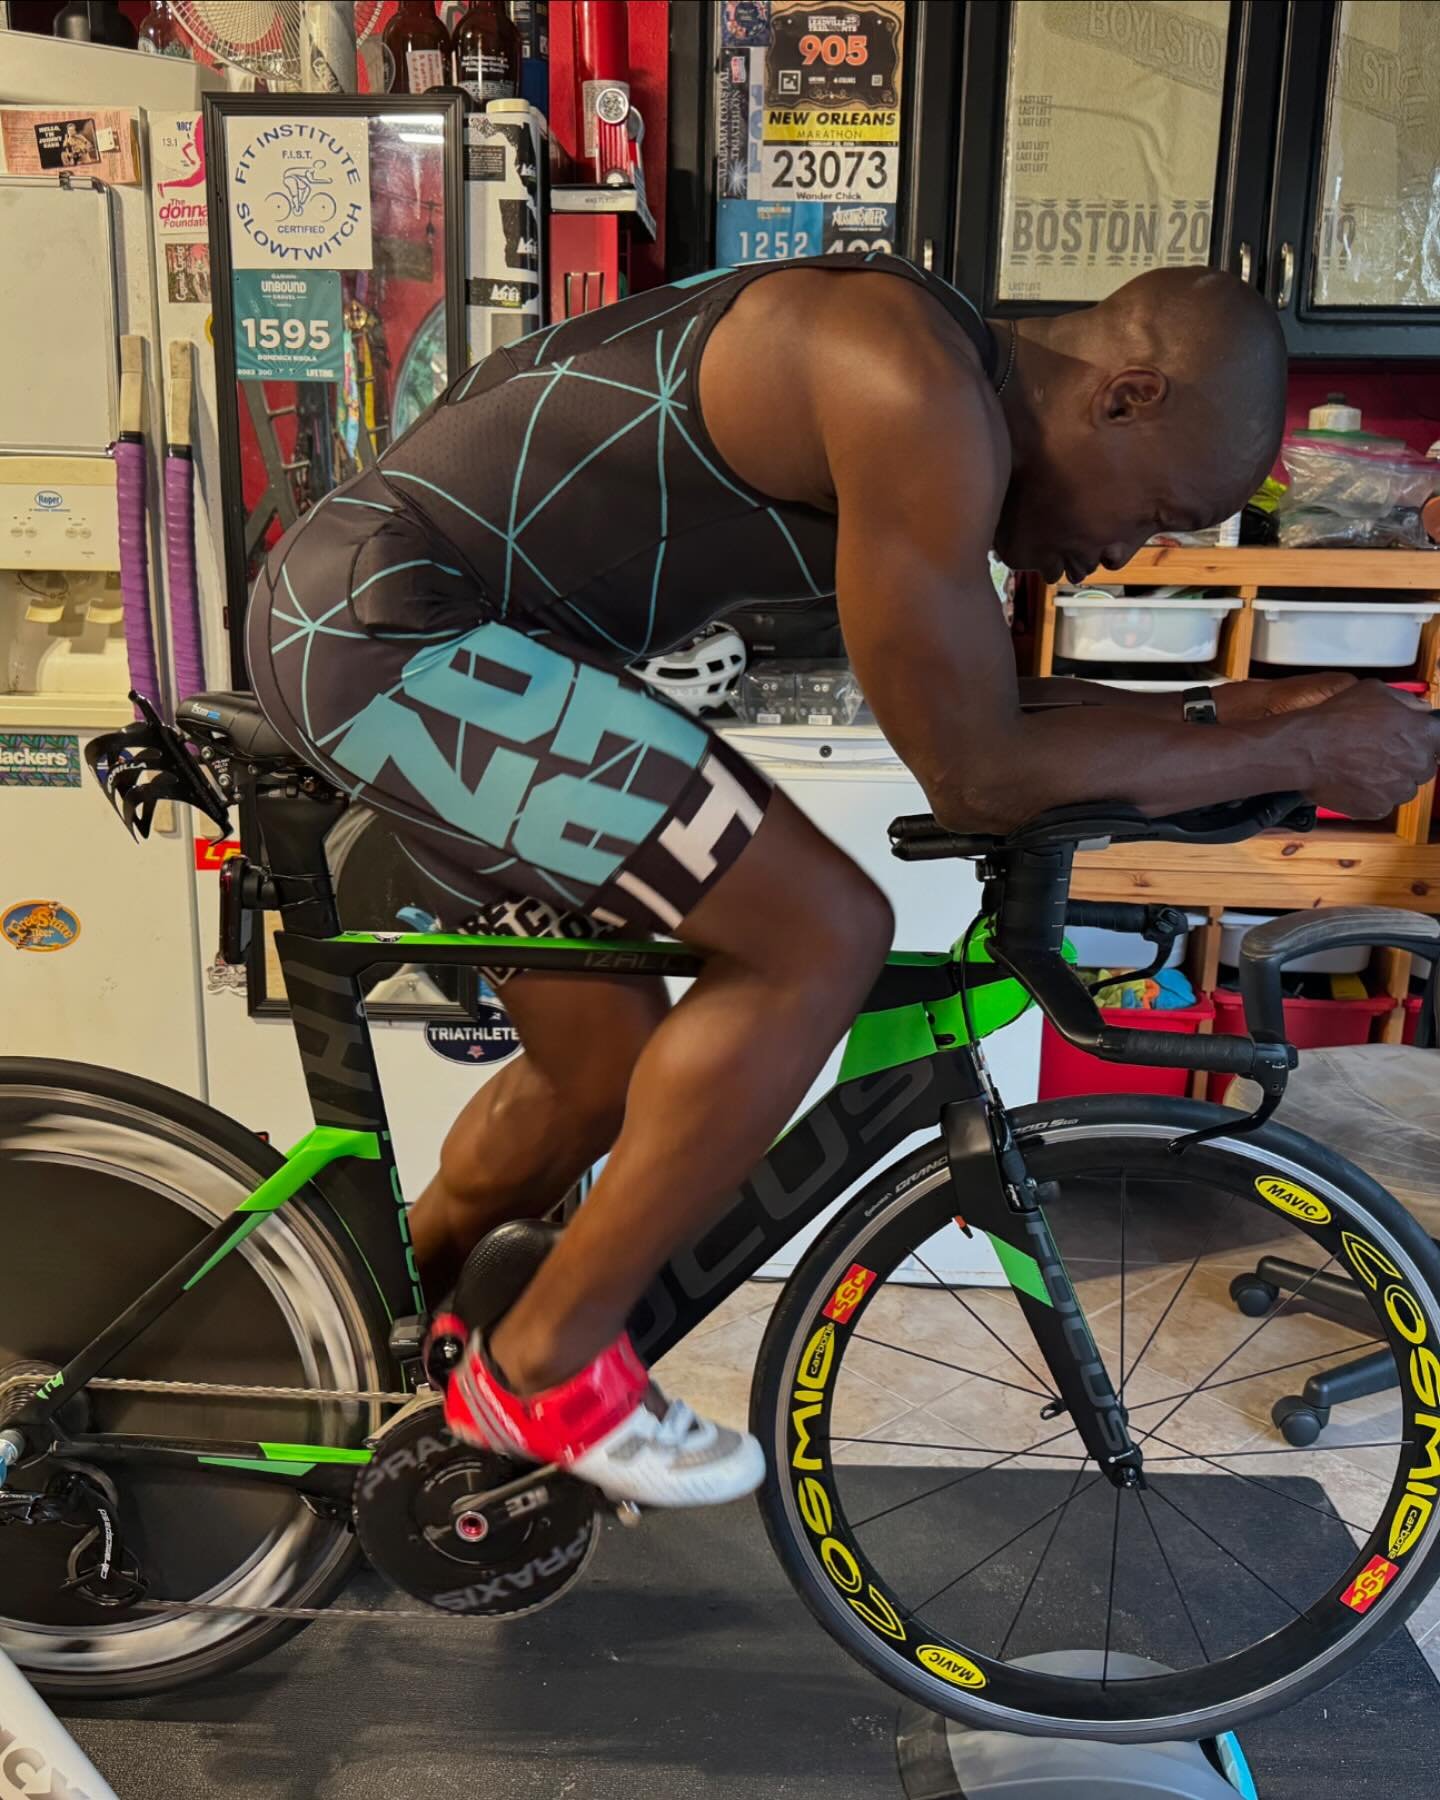 Todays #bikefit is all about Jeffers @ride_the_bike_1 who we recently did a new fit on since he got himself a new front end. He just had a great race at @ironmantri Gulf Coast with a 22.6mph avg &amp; even more impressive is he had a faster #run with